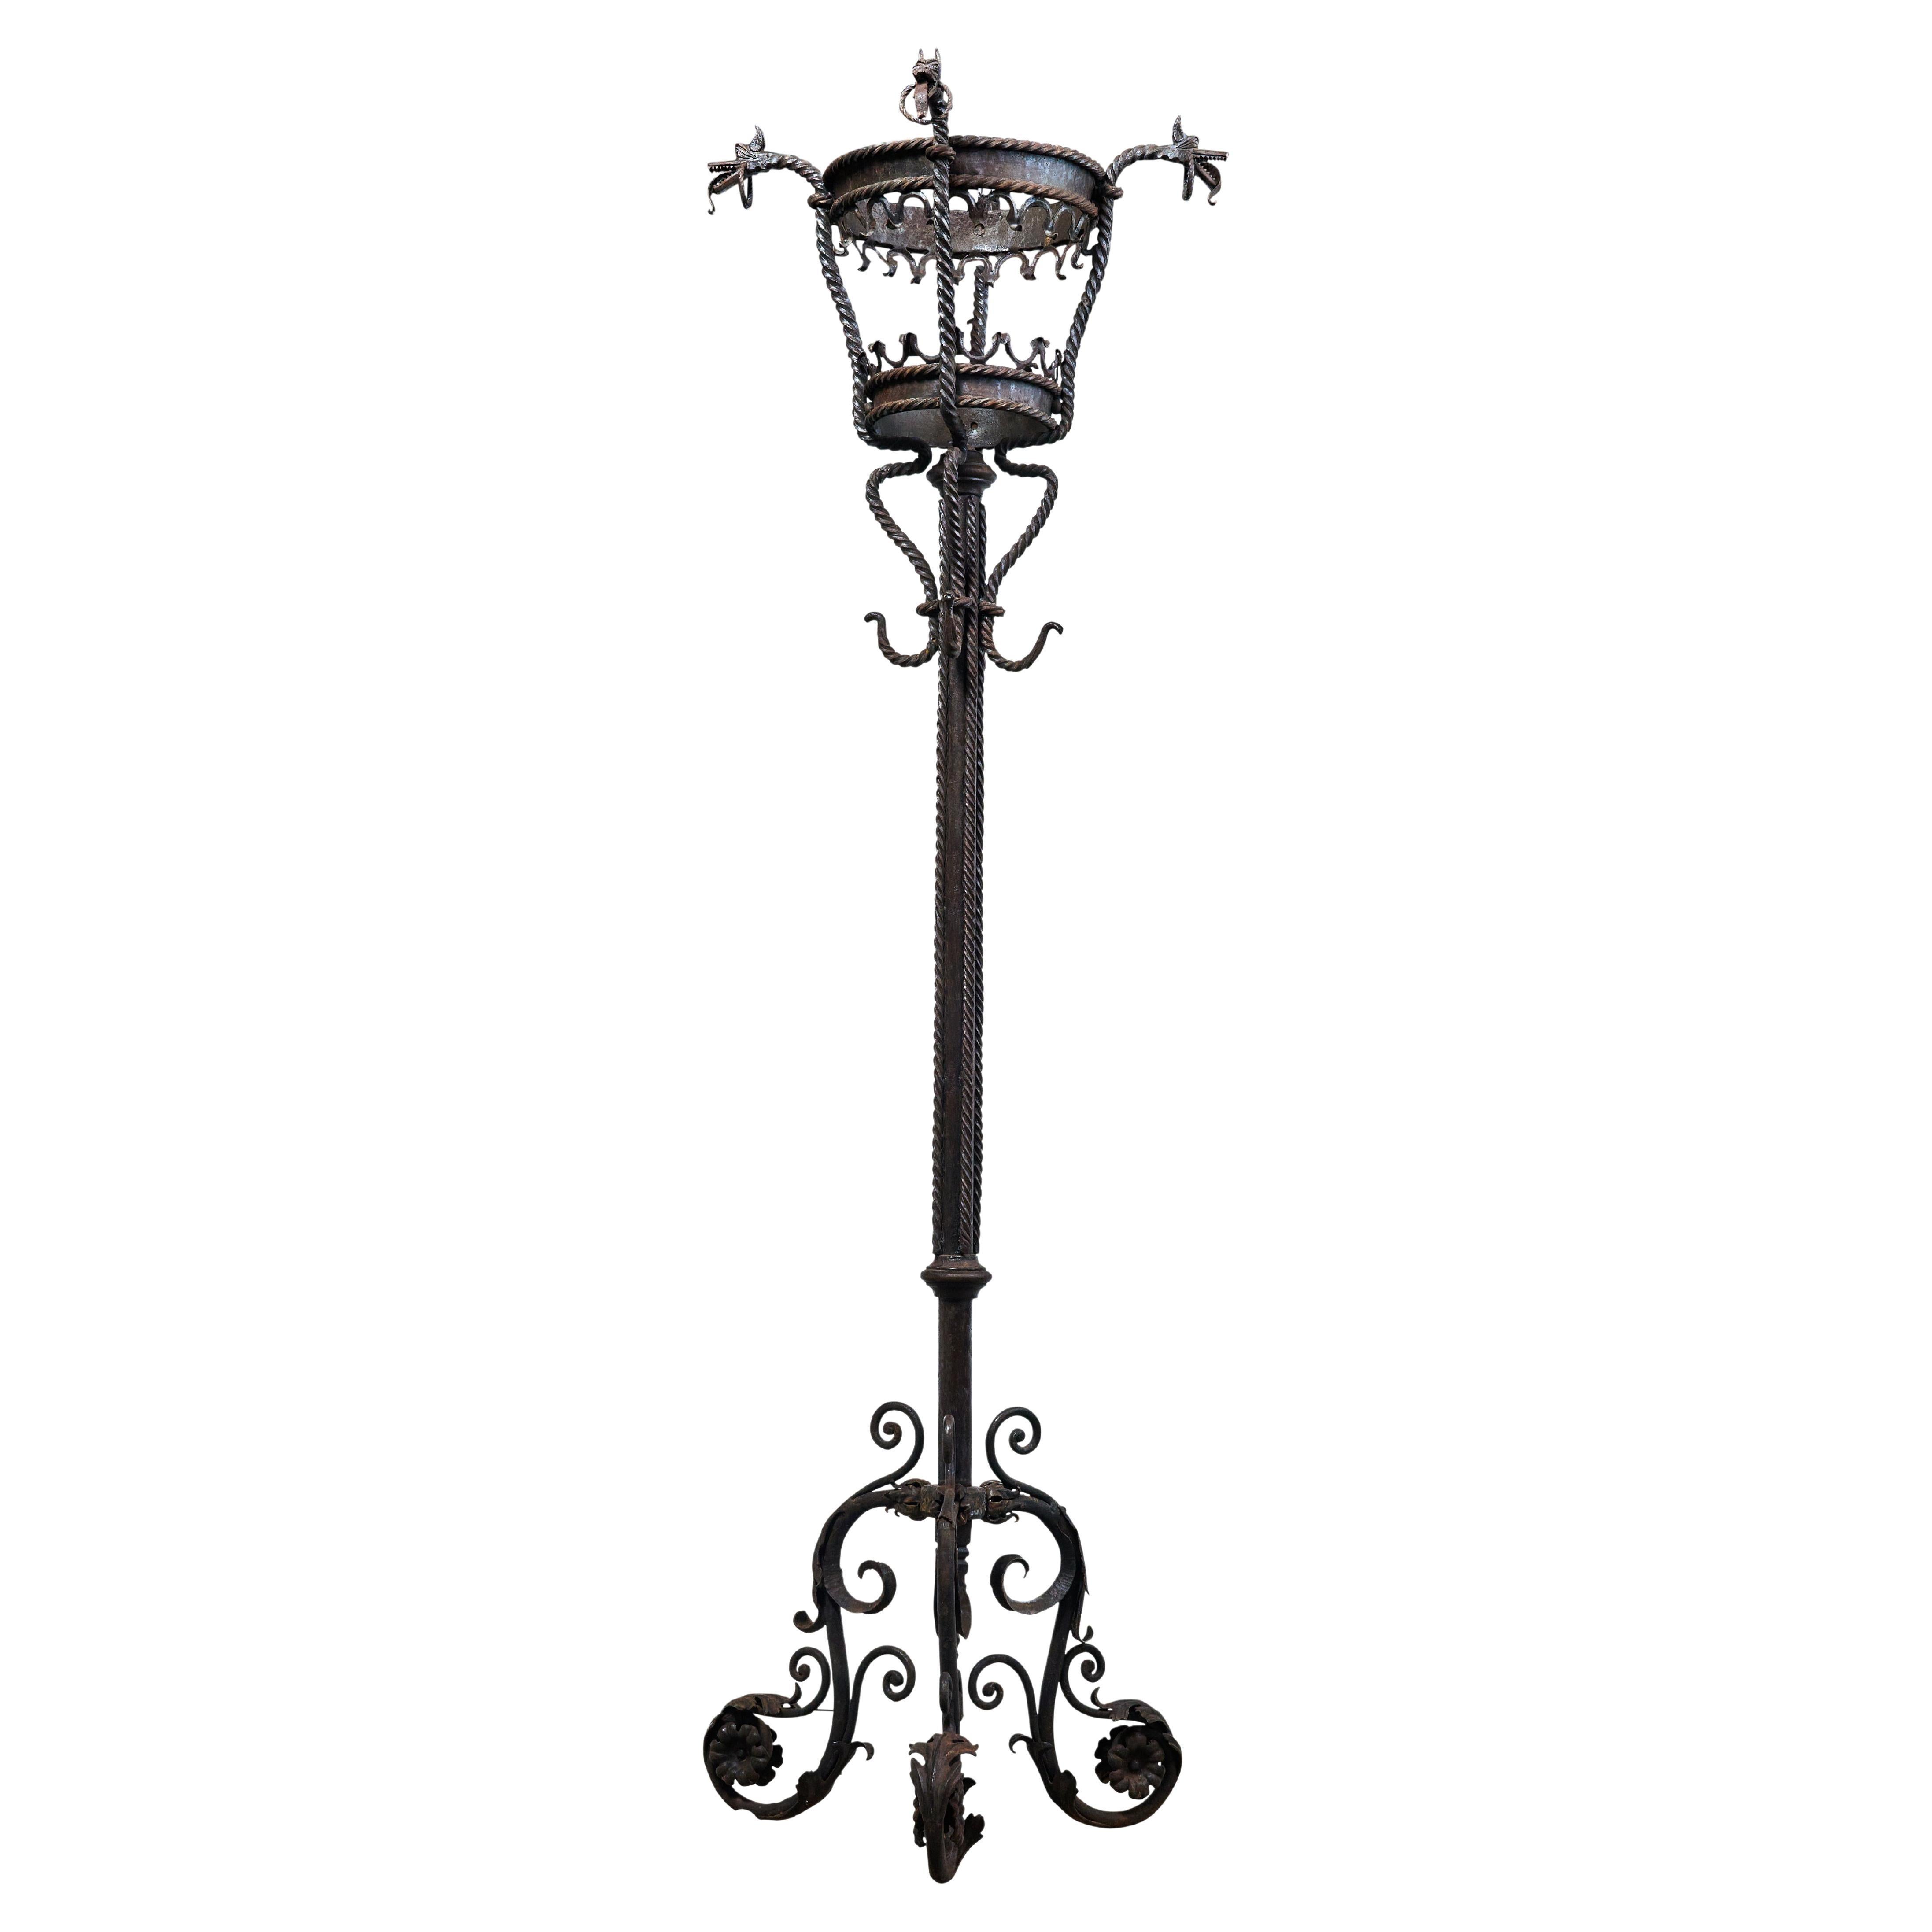 Wrought Iron Coat/Hat Rack with Beasties For Sale